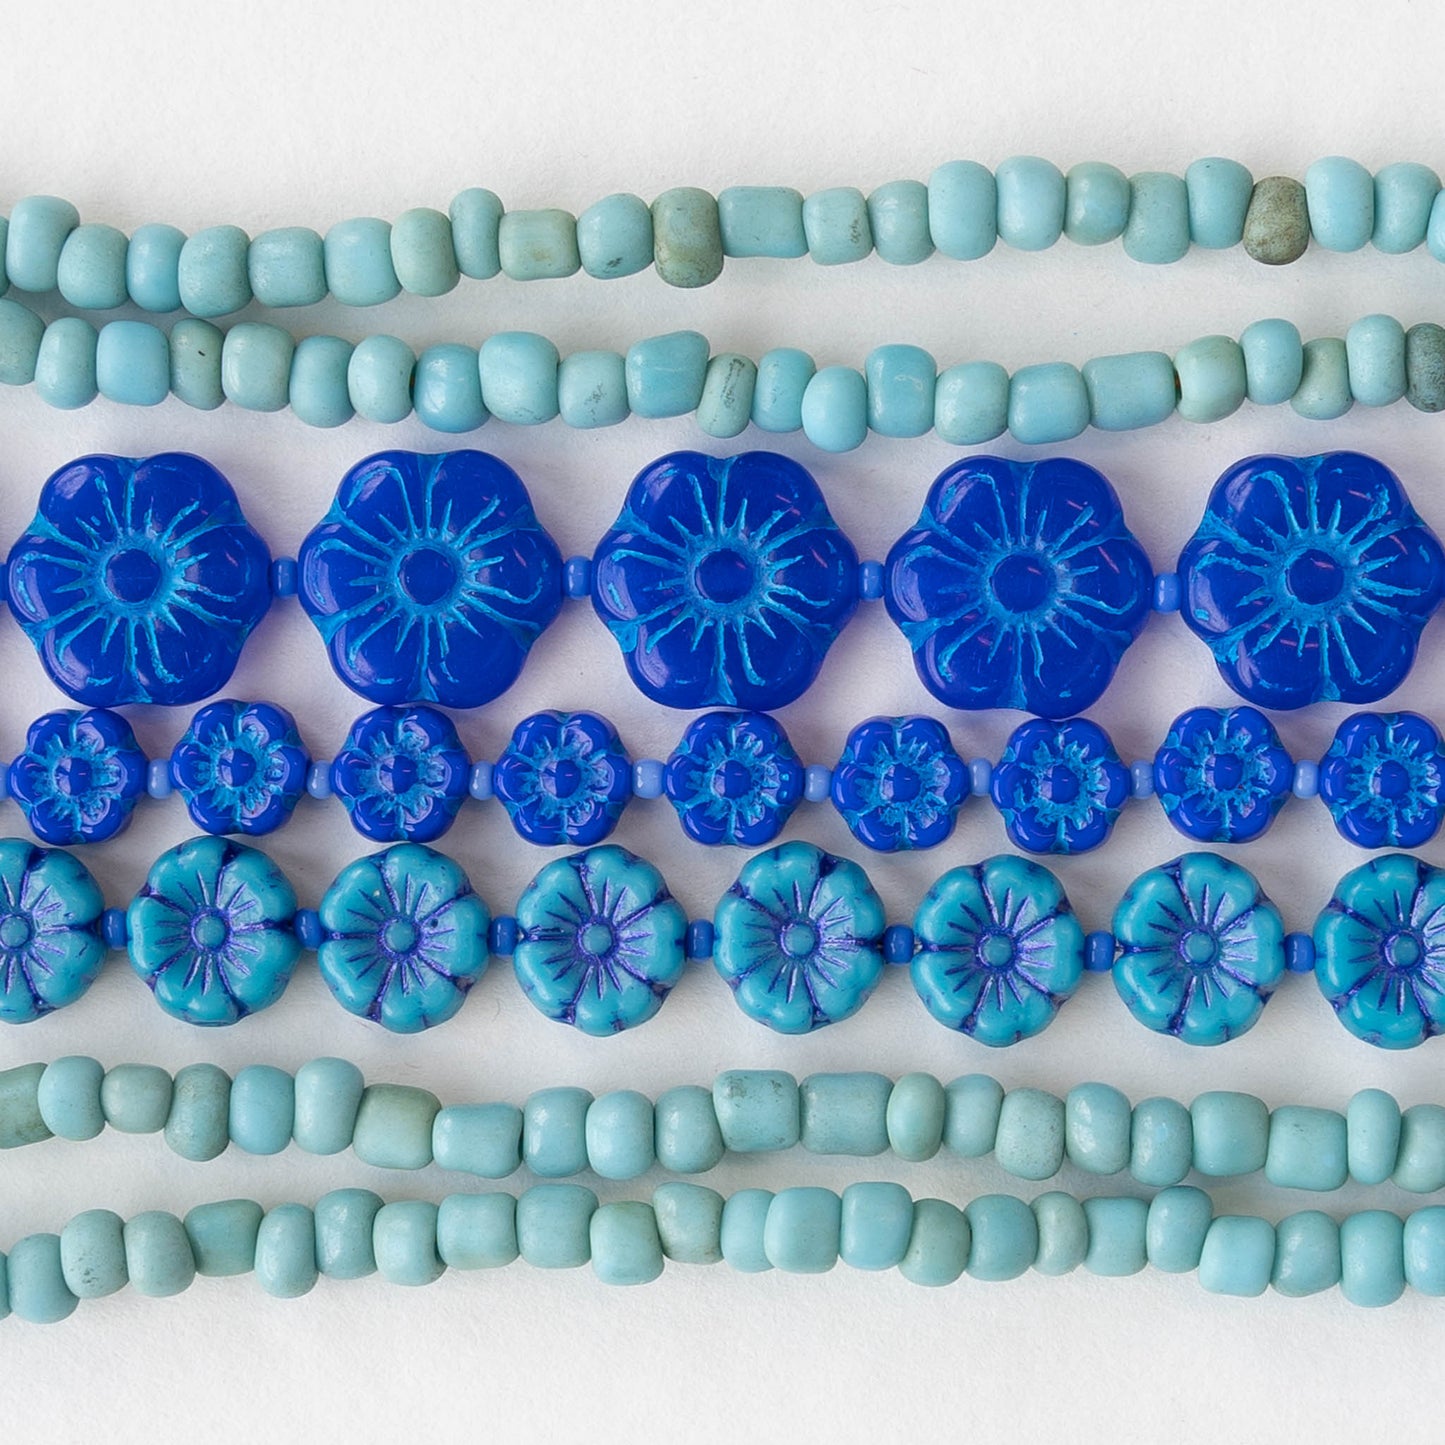 13mm Glass Flower Beads - Royal Blue with Blue Wash - 10 or 30 beads